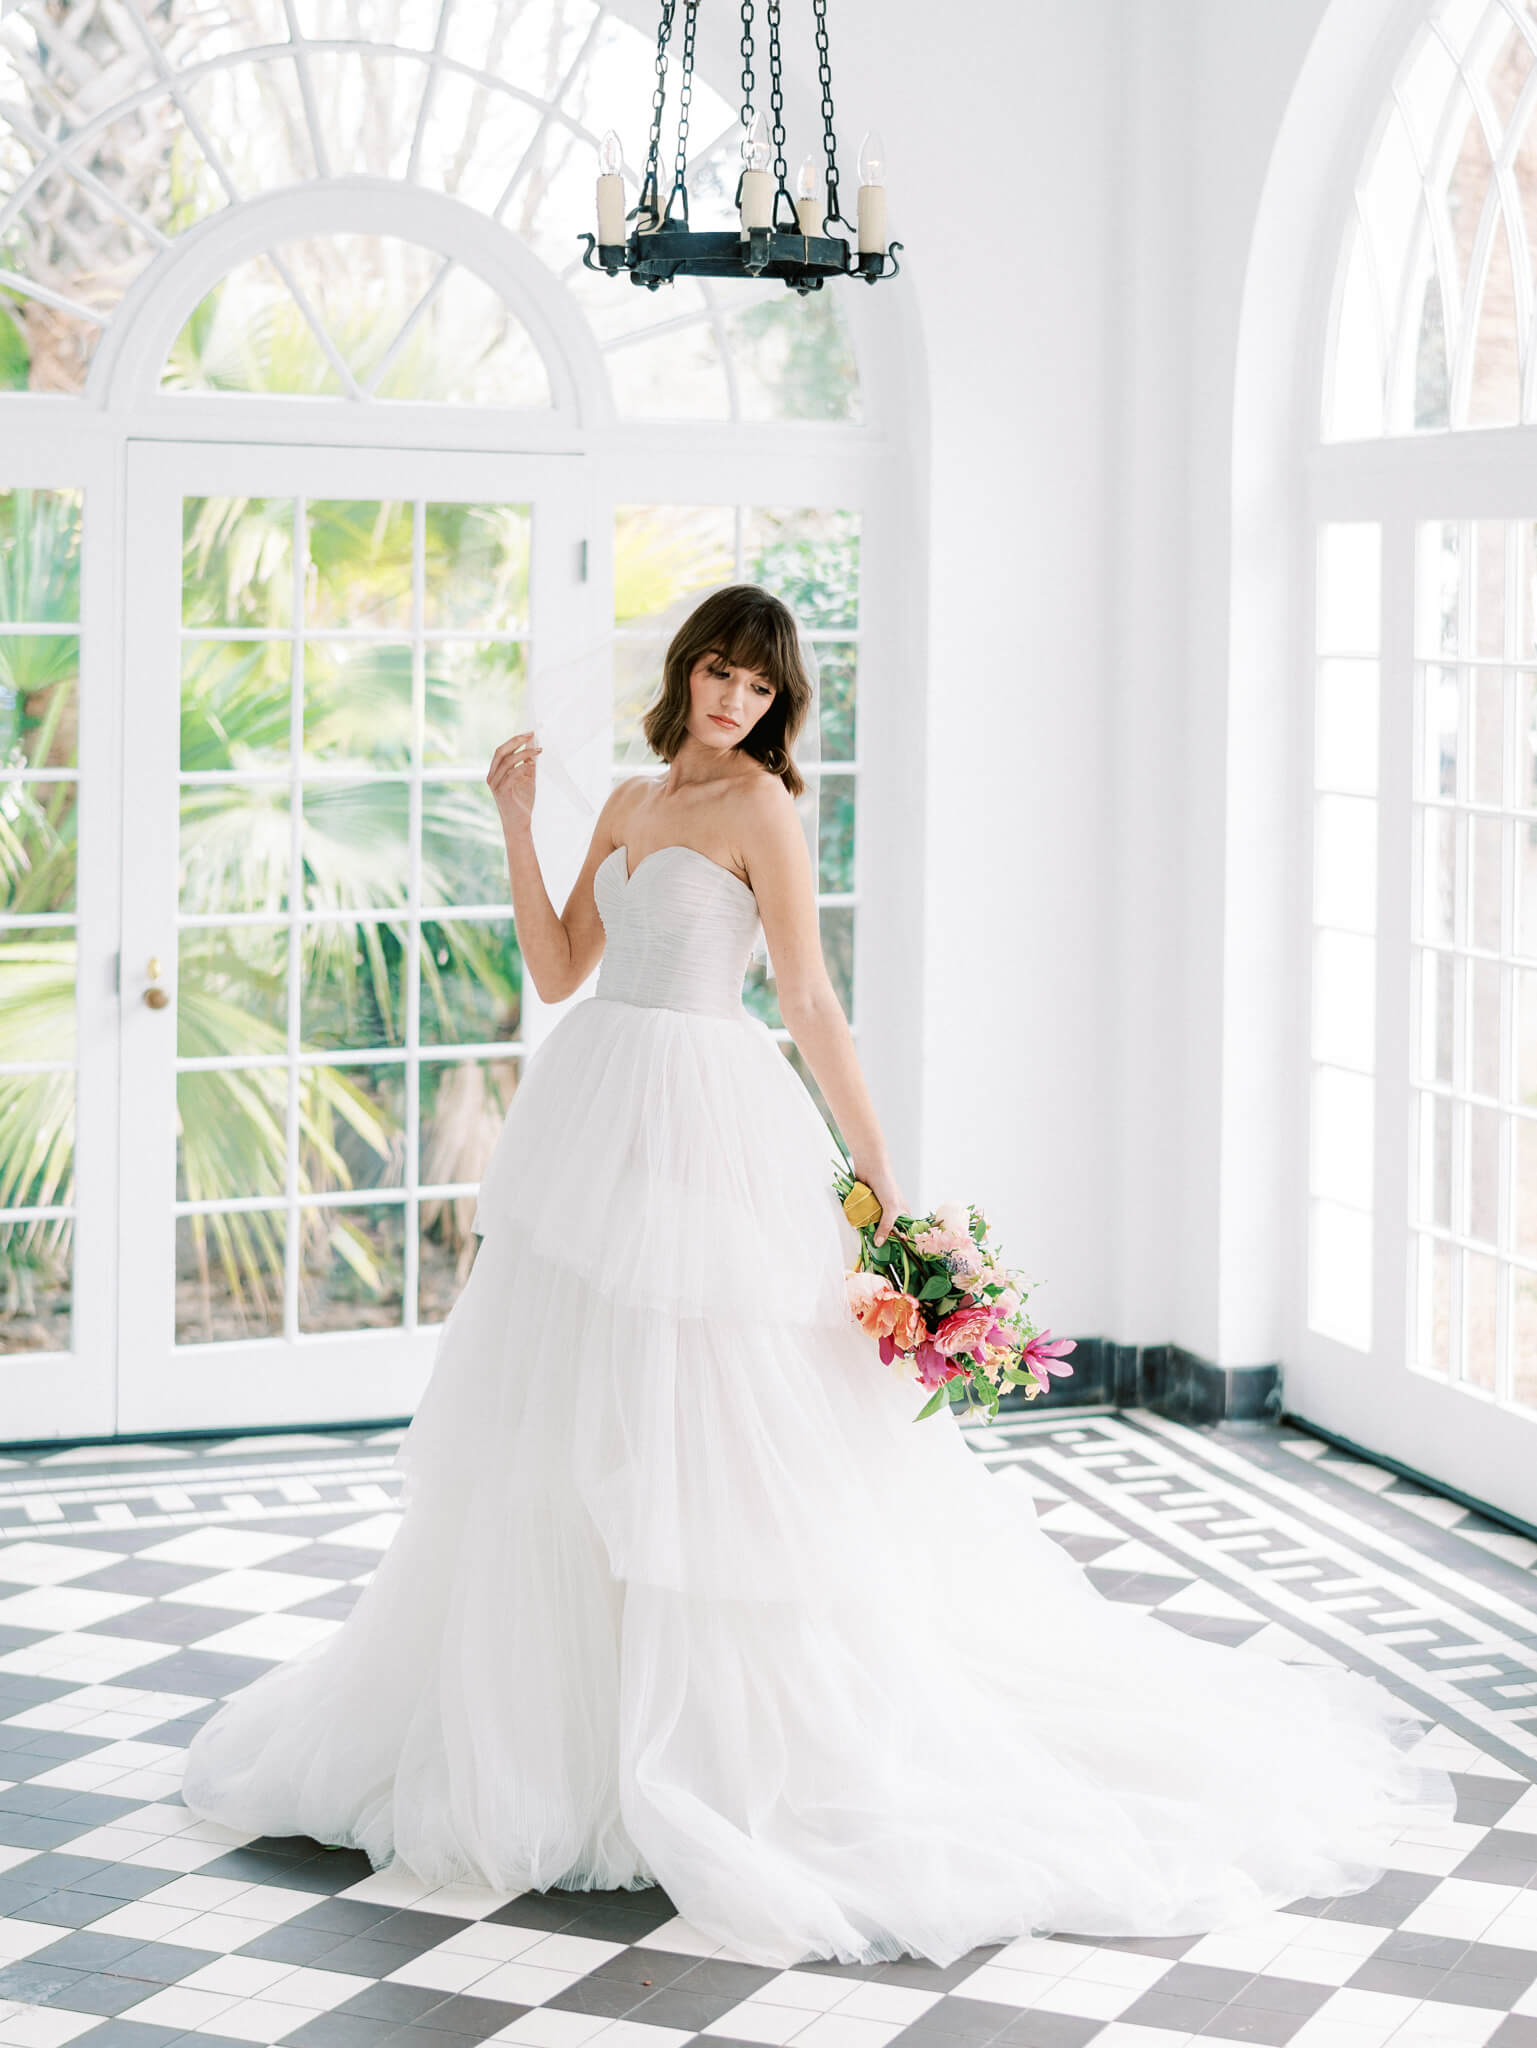 Portrait of a bride in a tulle gown holding her bouquet inside Lowndes Grove's entry with arched glass windows and black and white checkered floors.